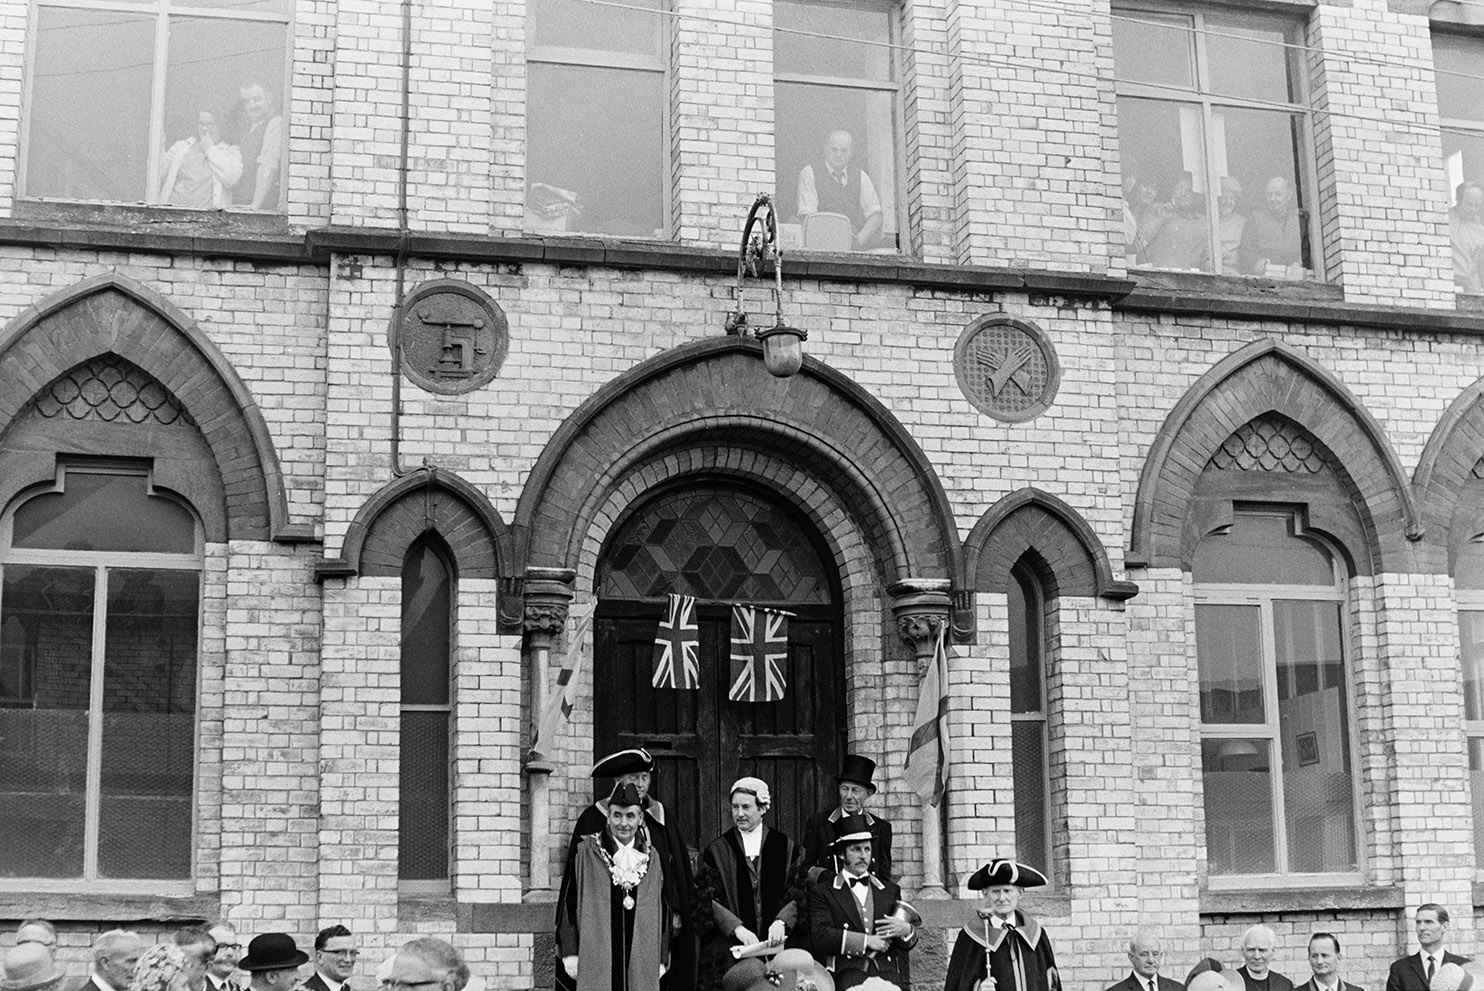 Dignitaries assembling on the steps of Vaughan Trapscott Glove Factory at Torrington May Fair before giving a speech. Union Jack flags are hung above them and people are watching from the first floor windows of the factory.